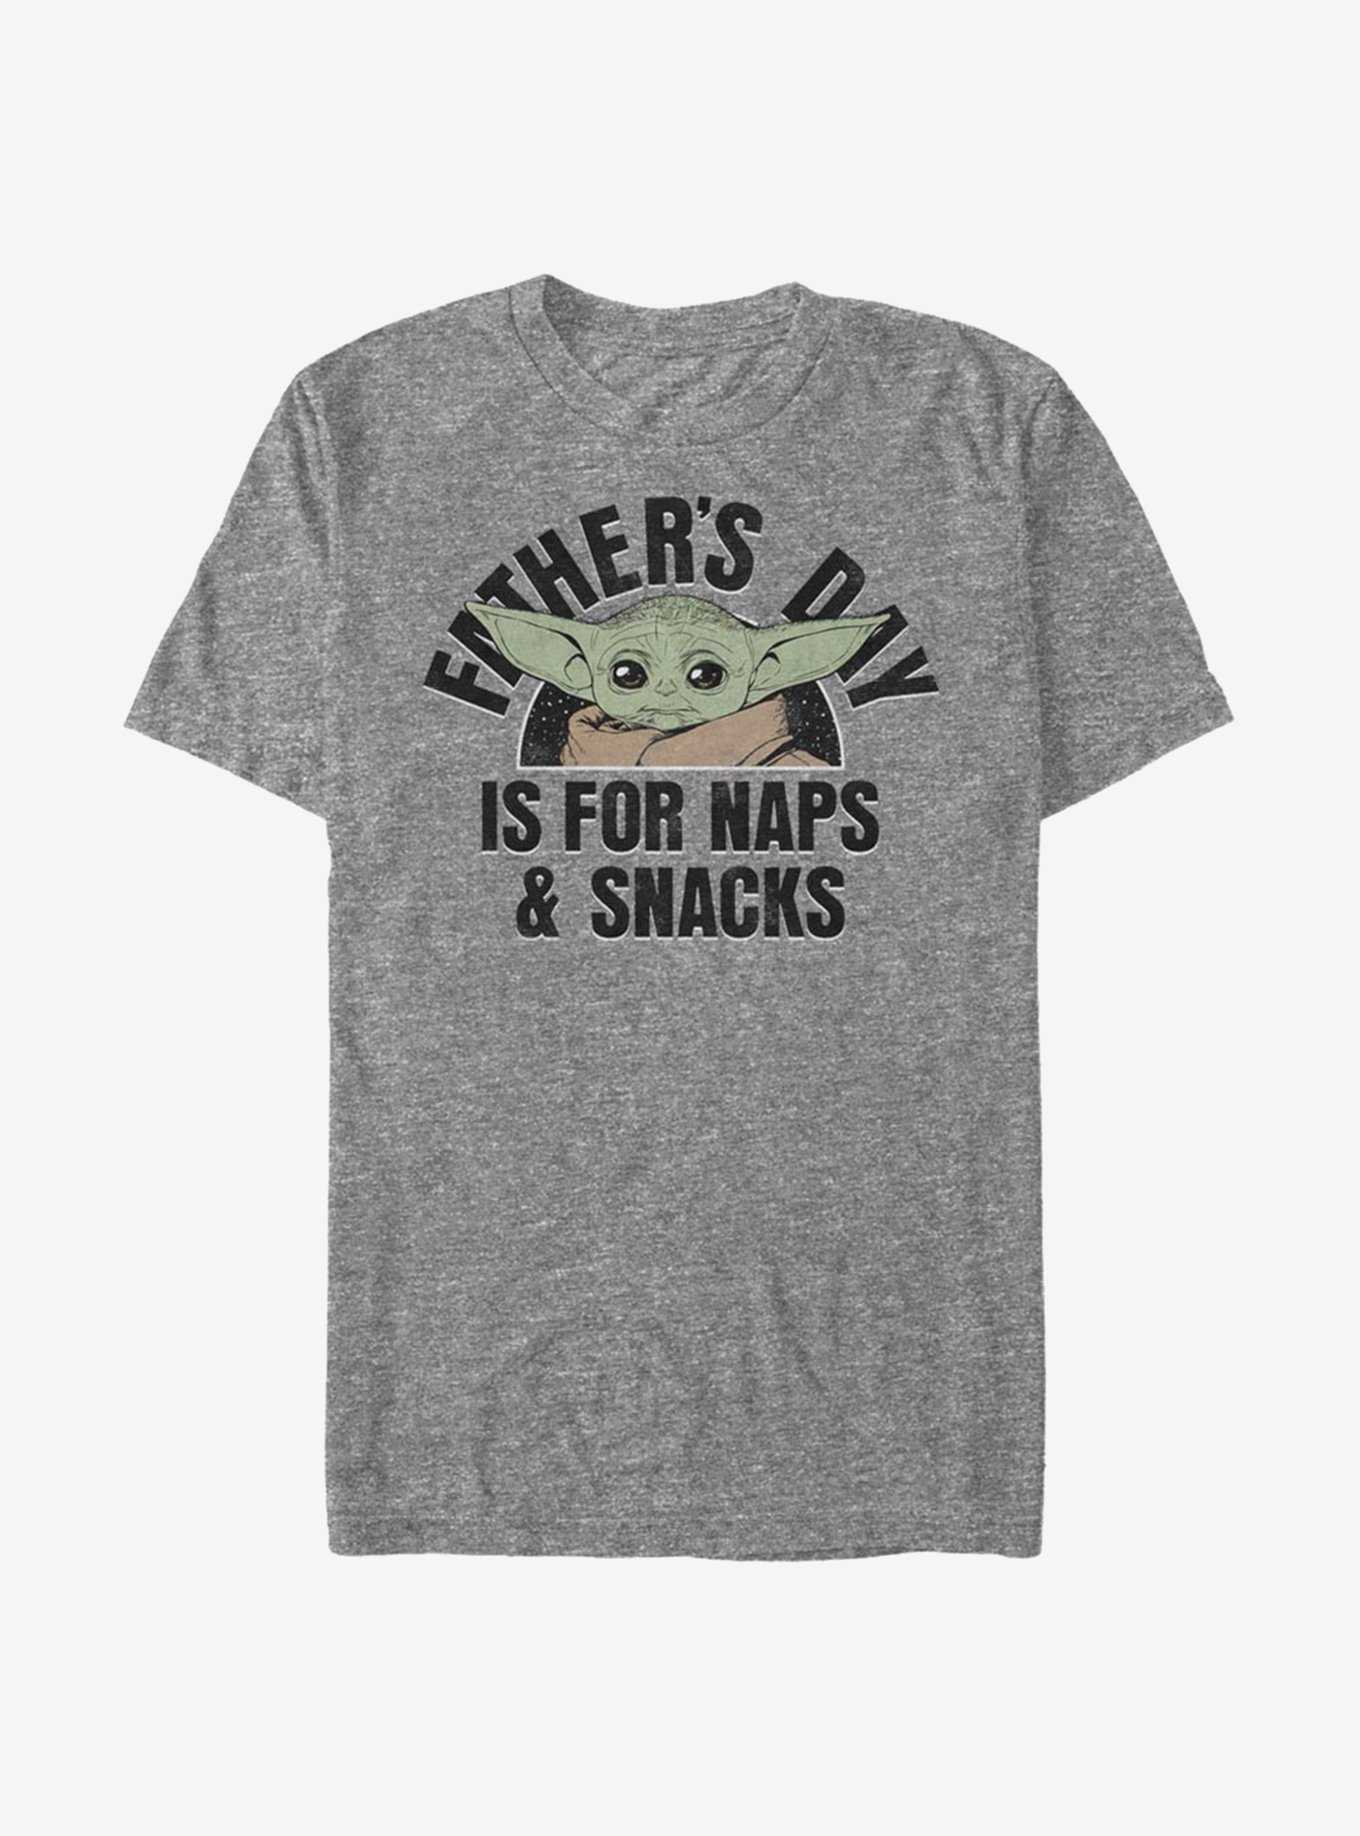 Star Wars The Mandalorian The Child Naps And Snacks T-Shirt, , hi-res